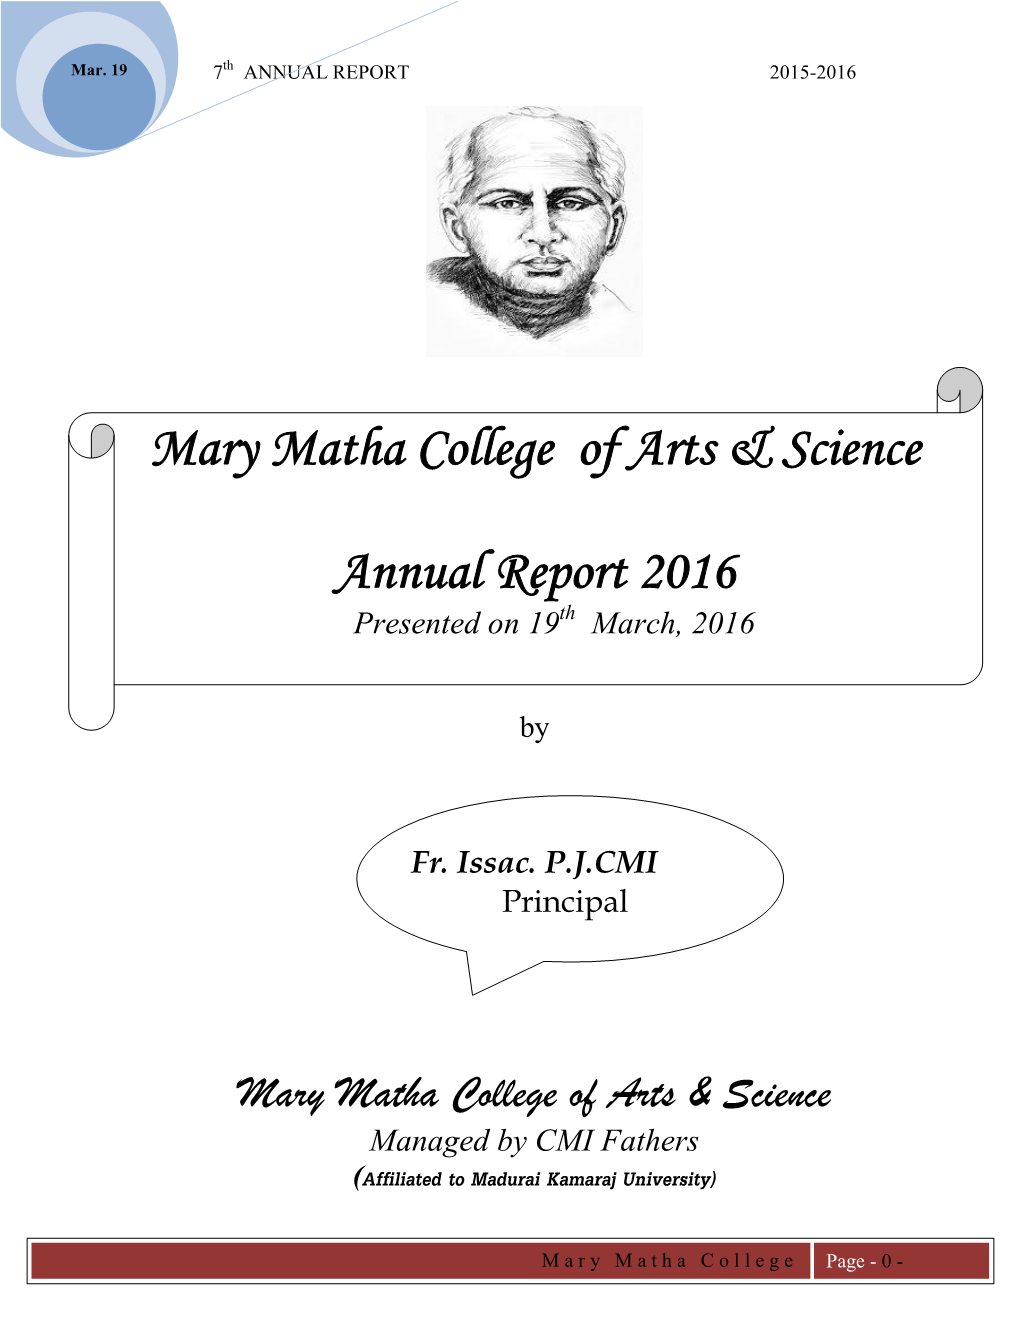 Mary Matha College of Arts & Science Annual Report 2016